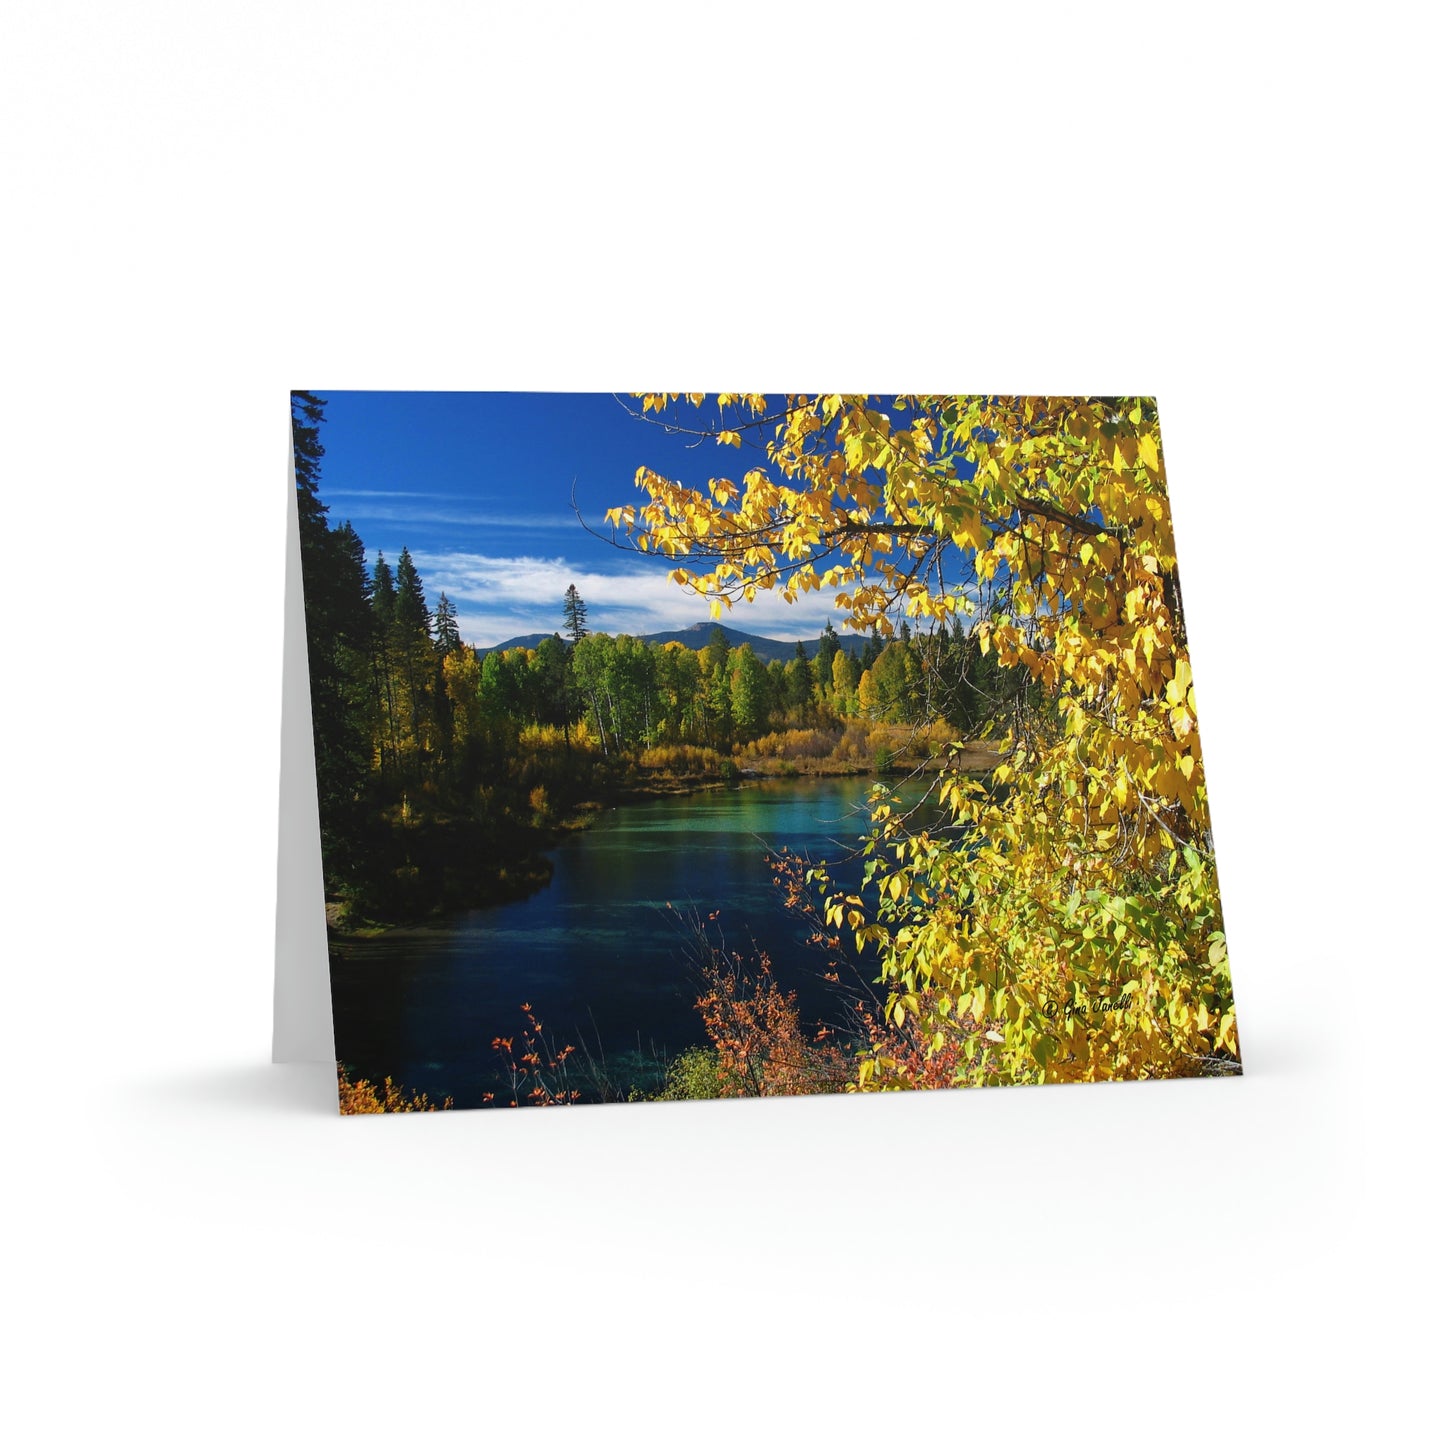 Wood River, Kimball State Park, Ft. Klamath Or. Greeting cards (8, 16, and 24 pcs)